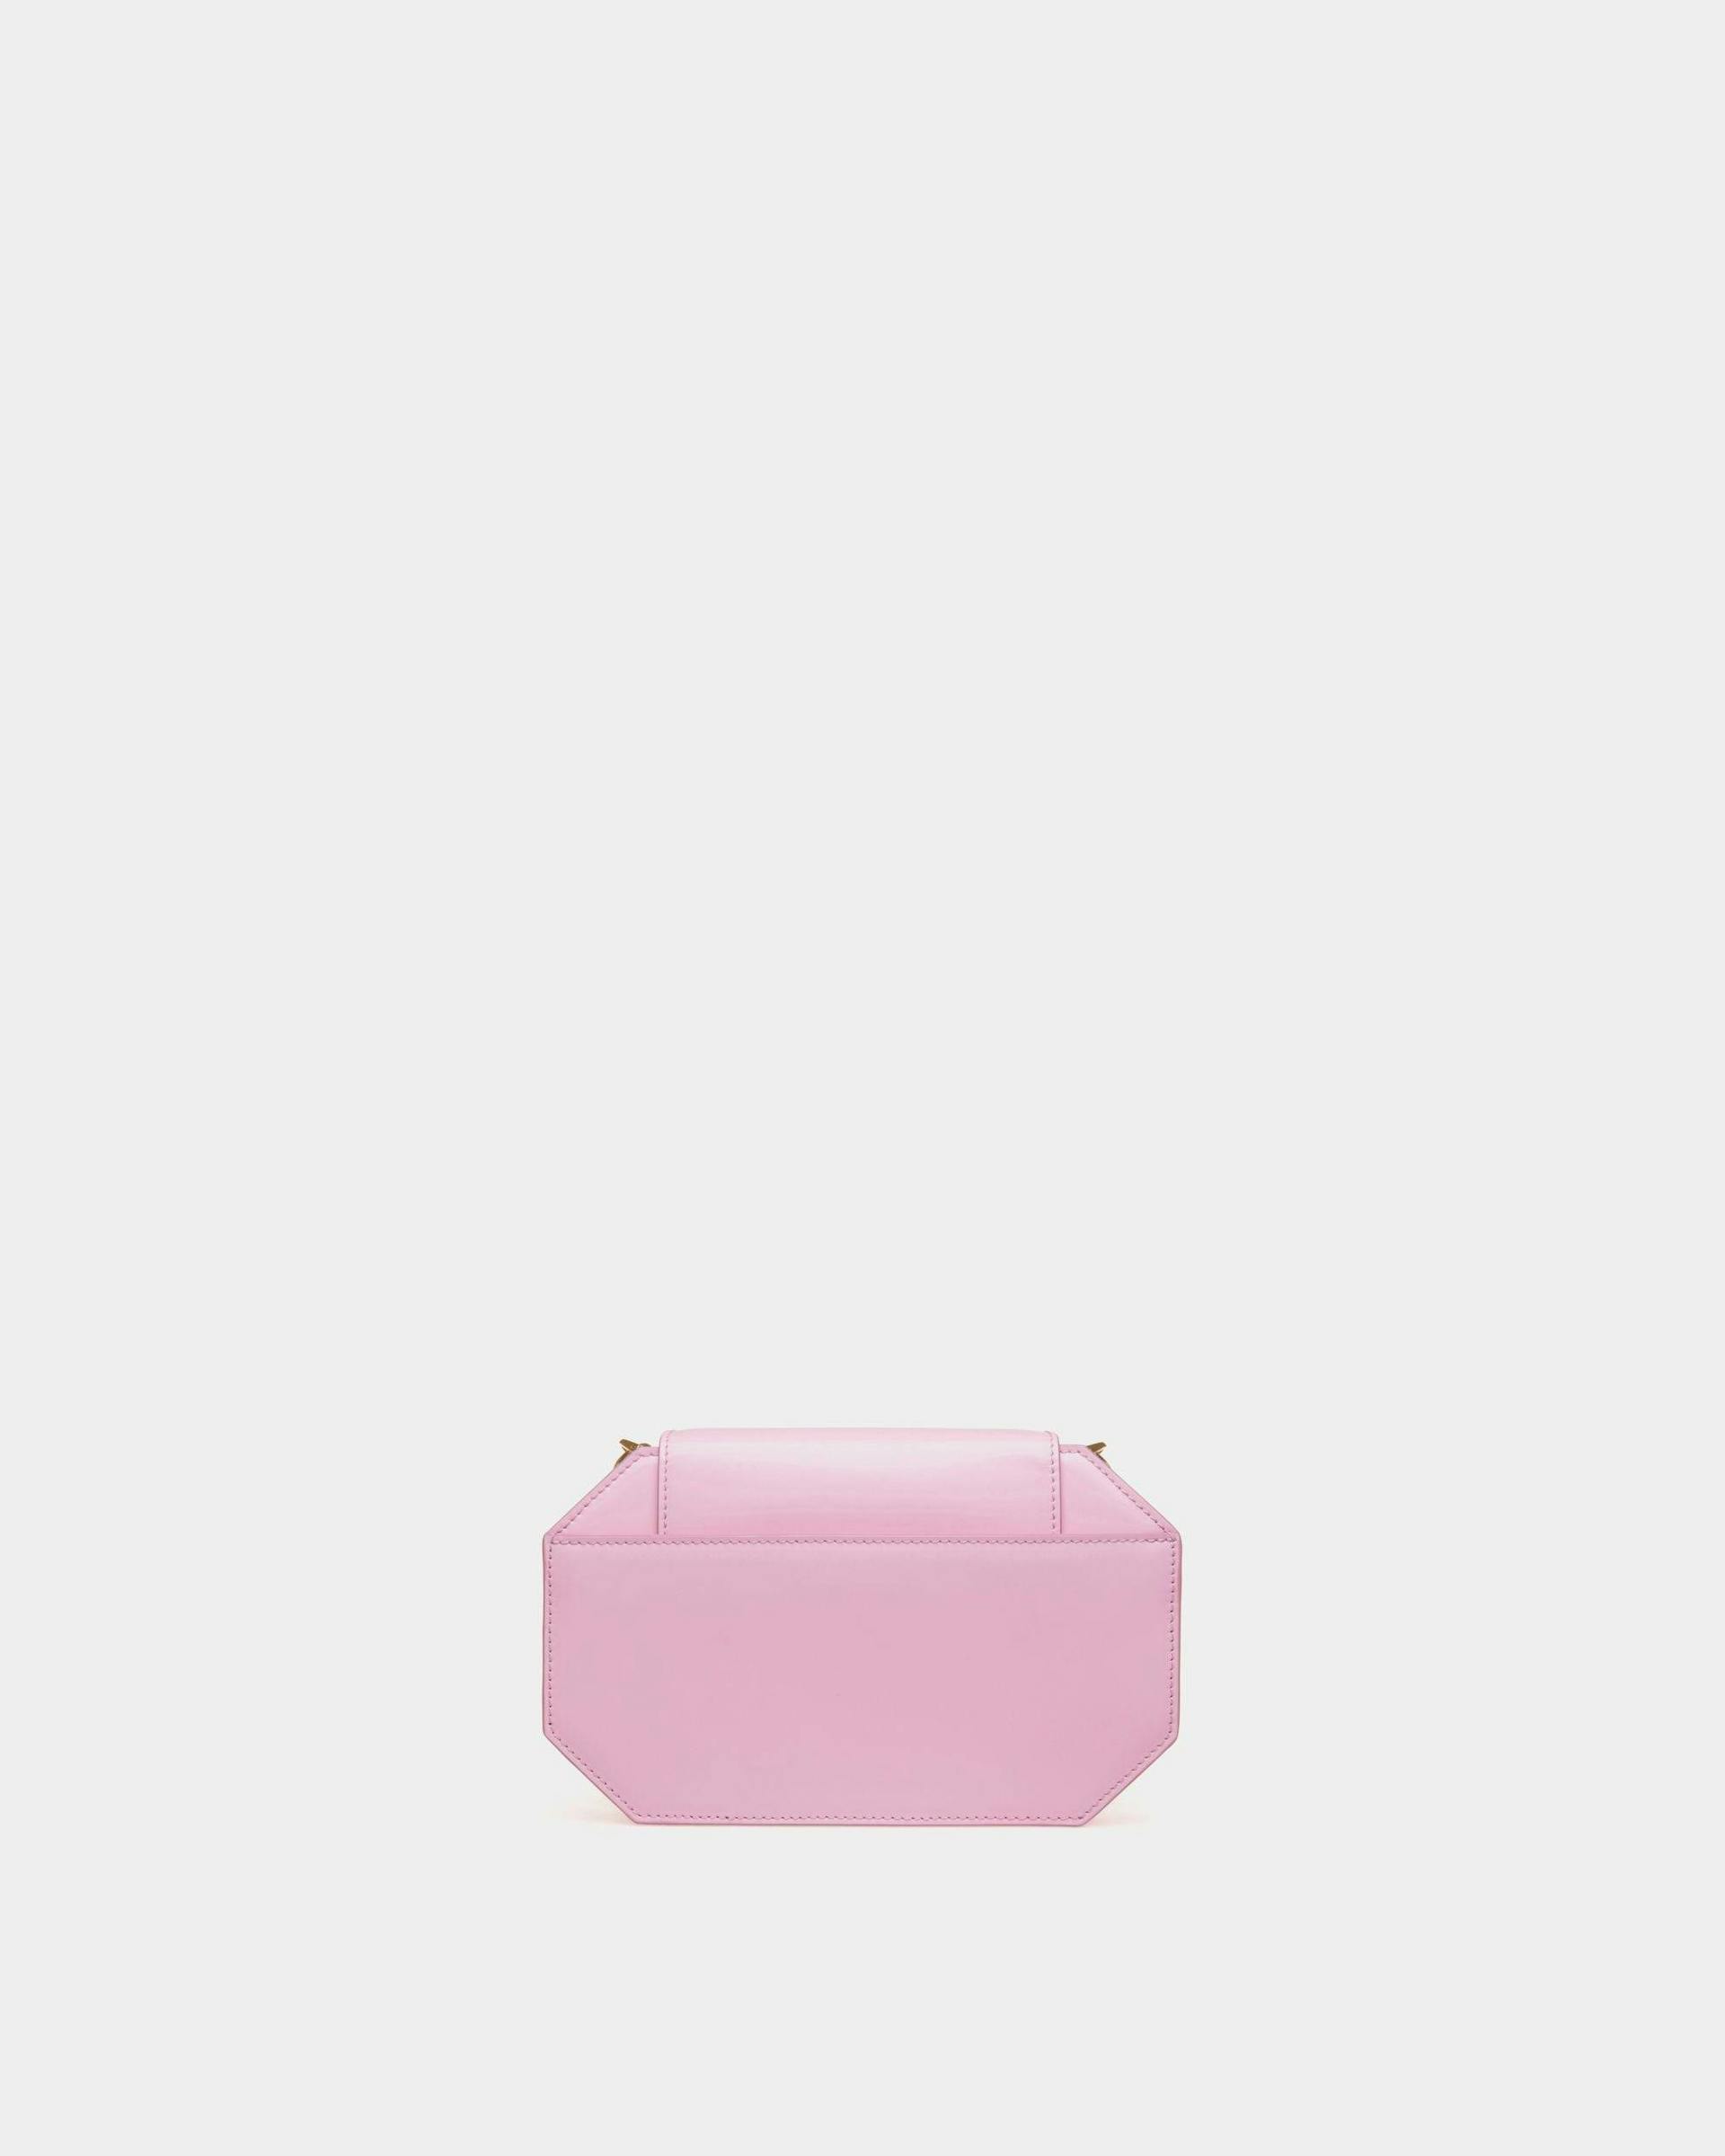 Women's Emblem Mini Bag in Pink Patent Leather | Bally | Still Life Back